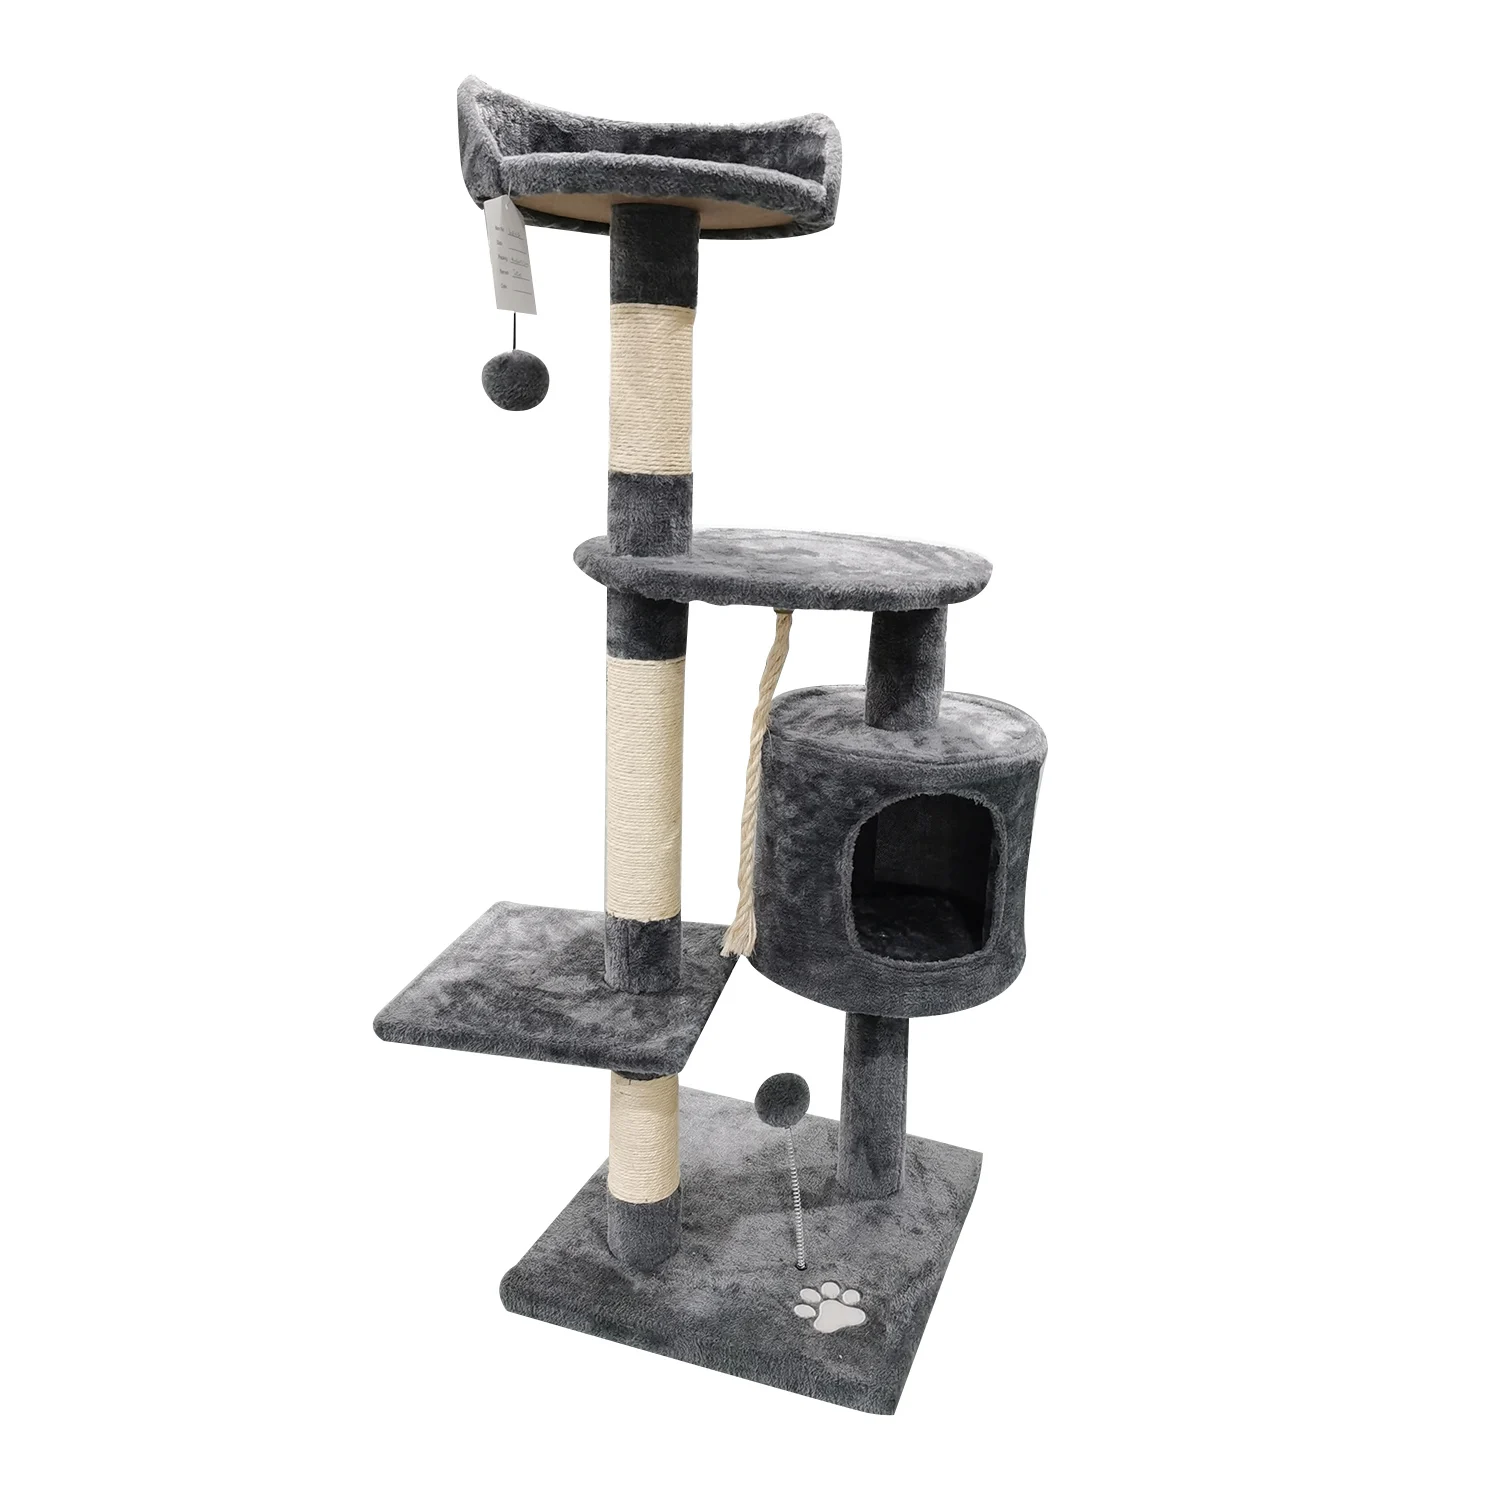 

Pet Cats Tree House Condo Perch Entertainment Playground Stable Furniture for Cats Kittens Multi-Level Tower